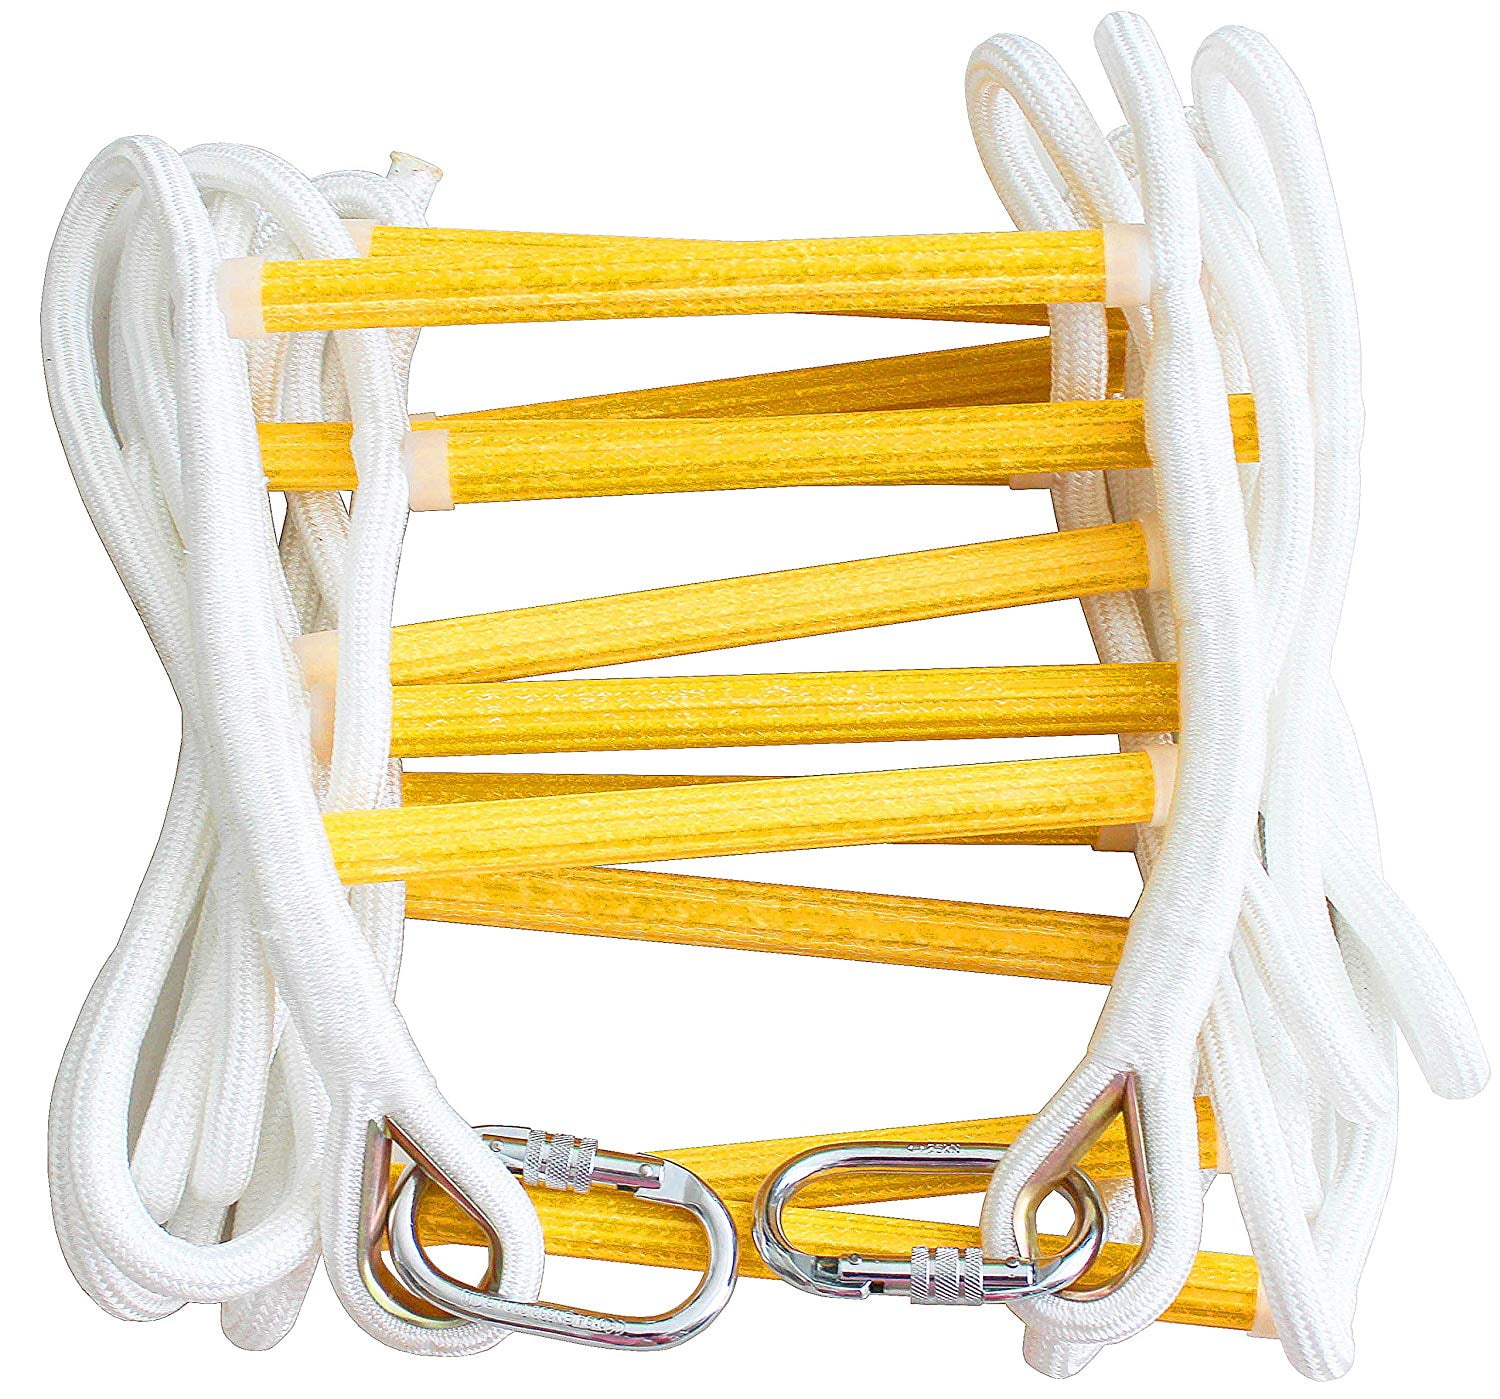 ISOP Emergency Fire Escape Rope Ladder 2 Story 16ft with Carabiners -  Reusable, Lightweight & Portable 